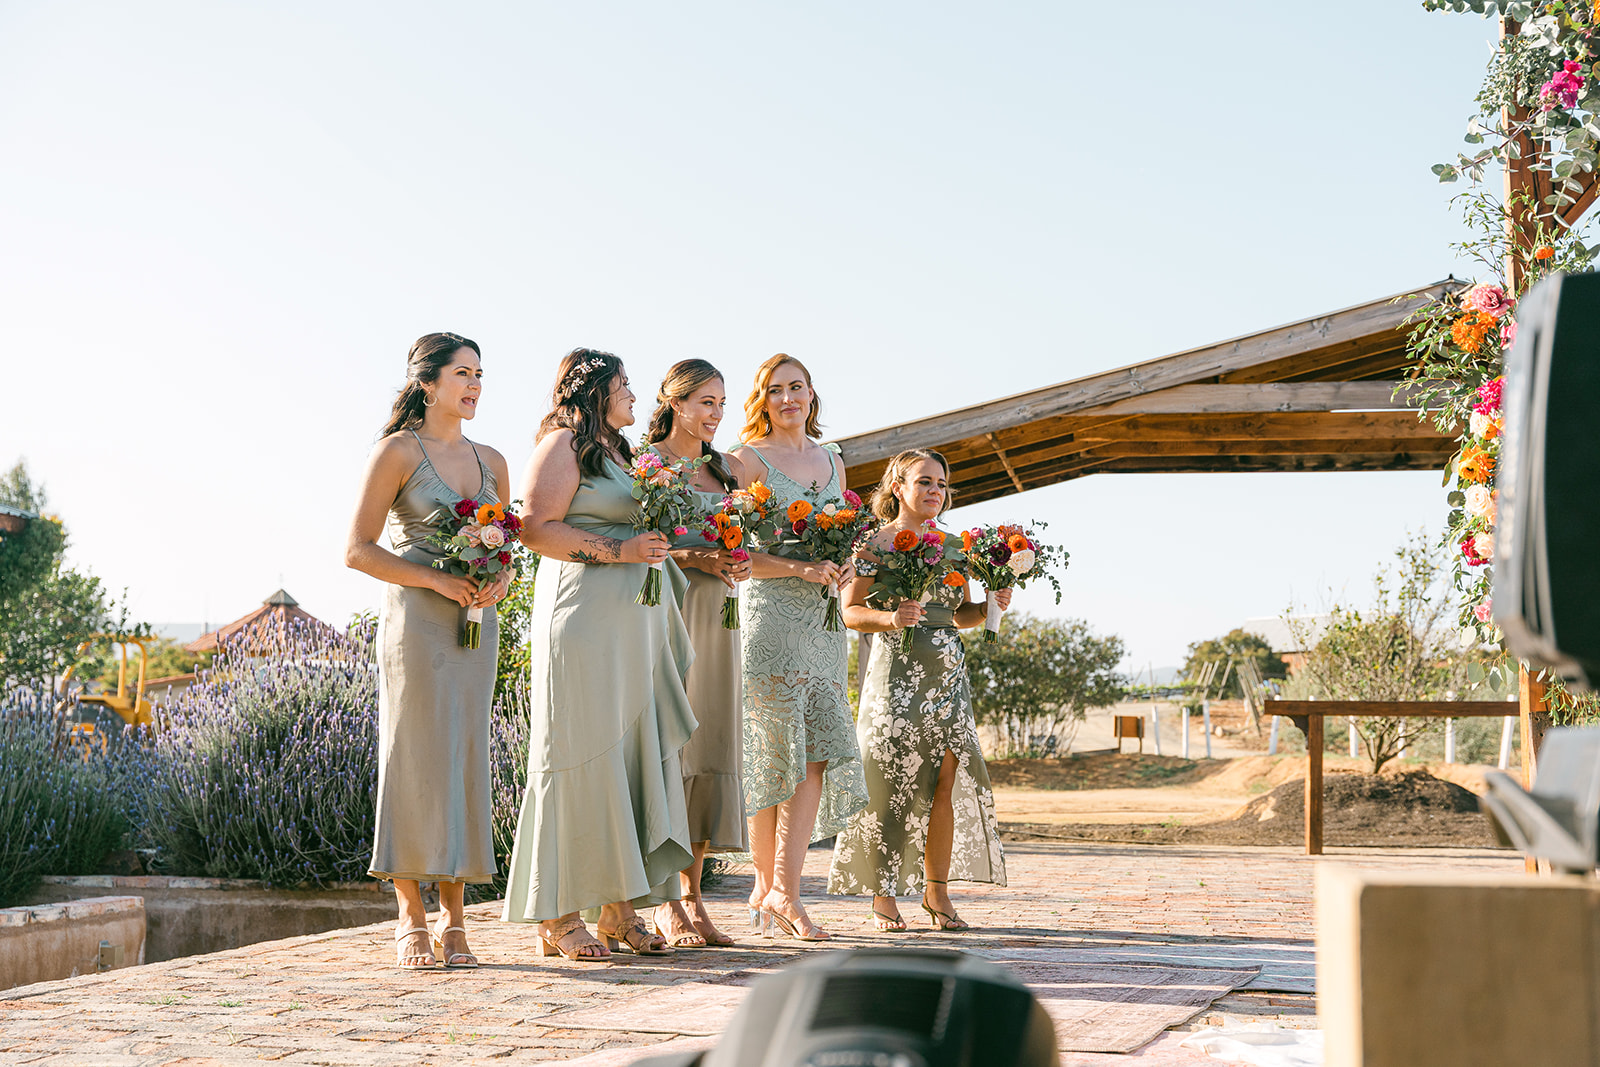 Wedding photography
Wedding in Valle de Guadalupe